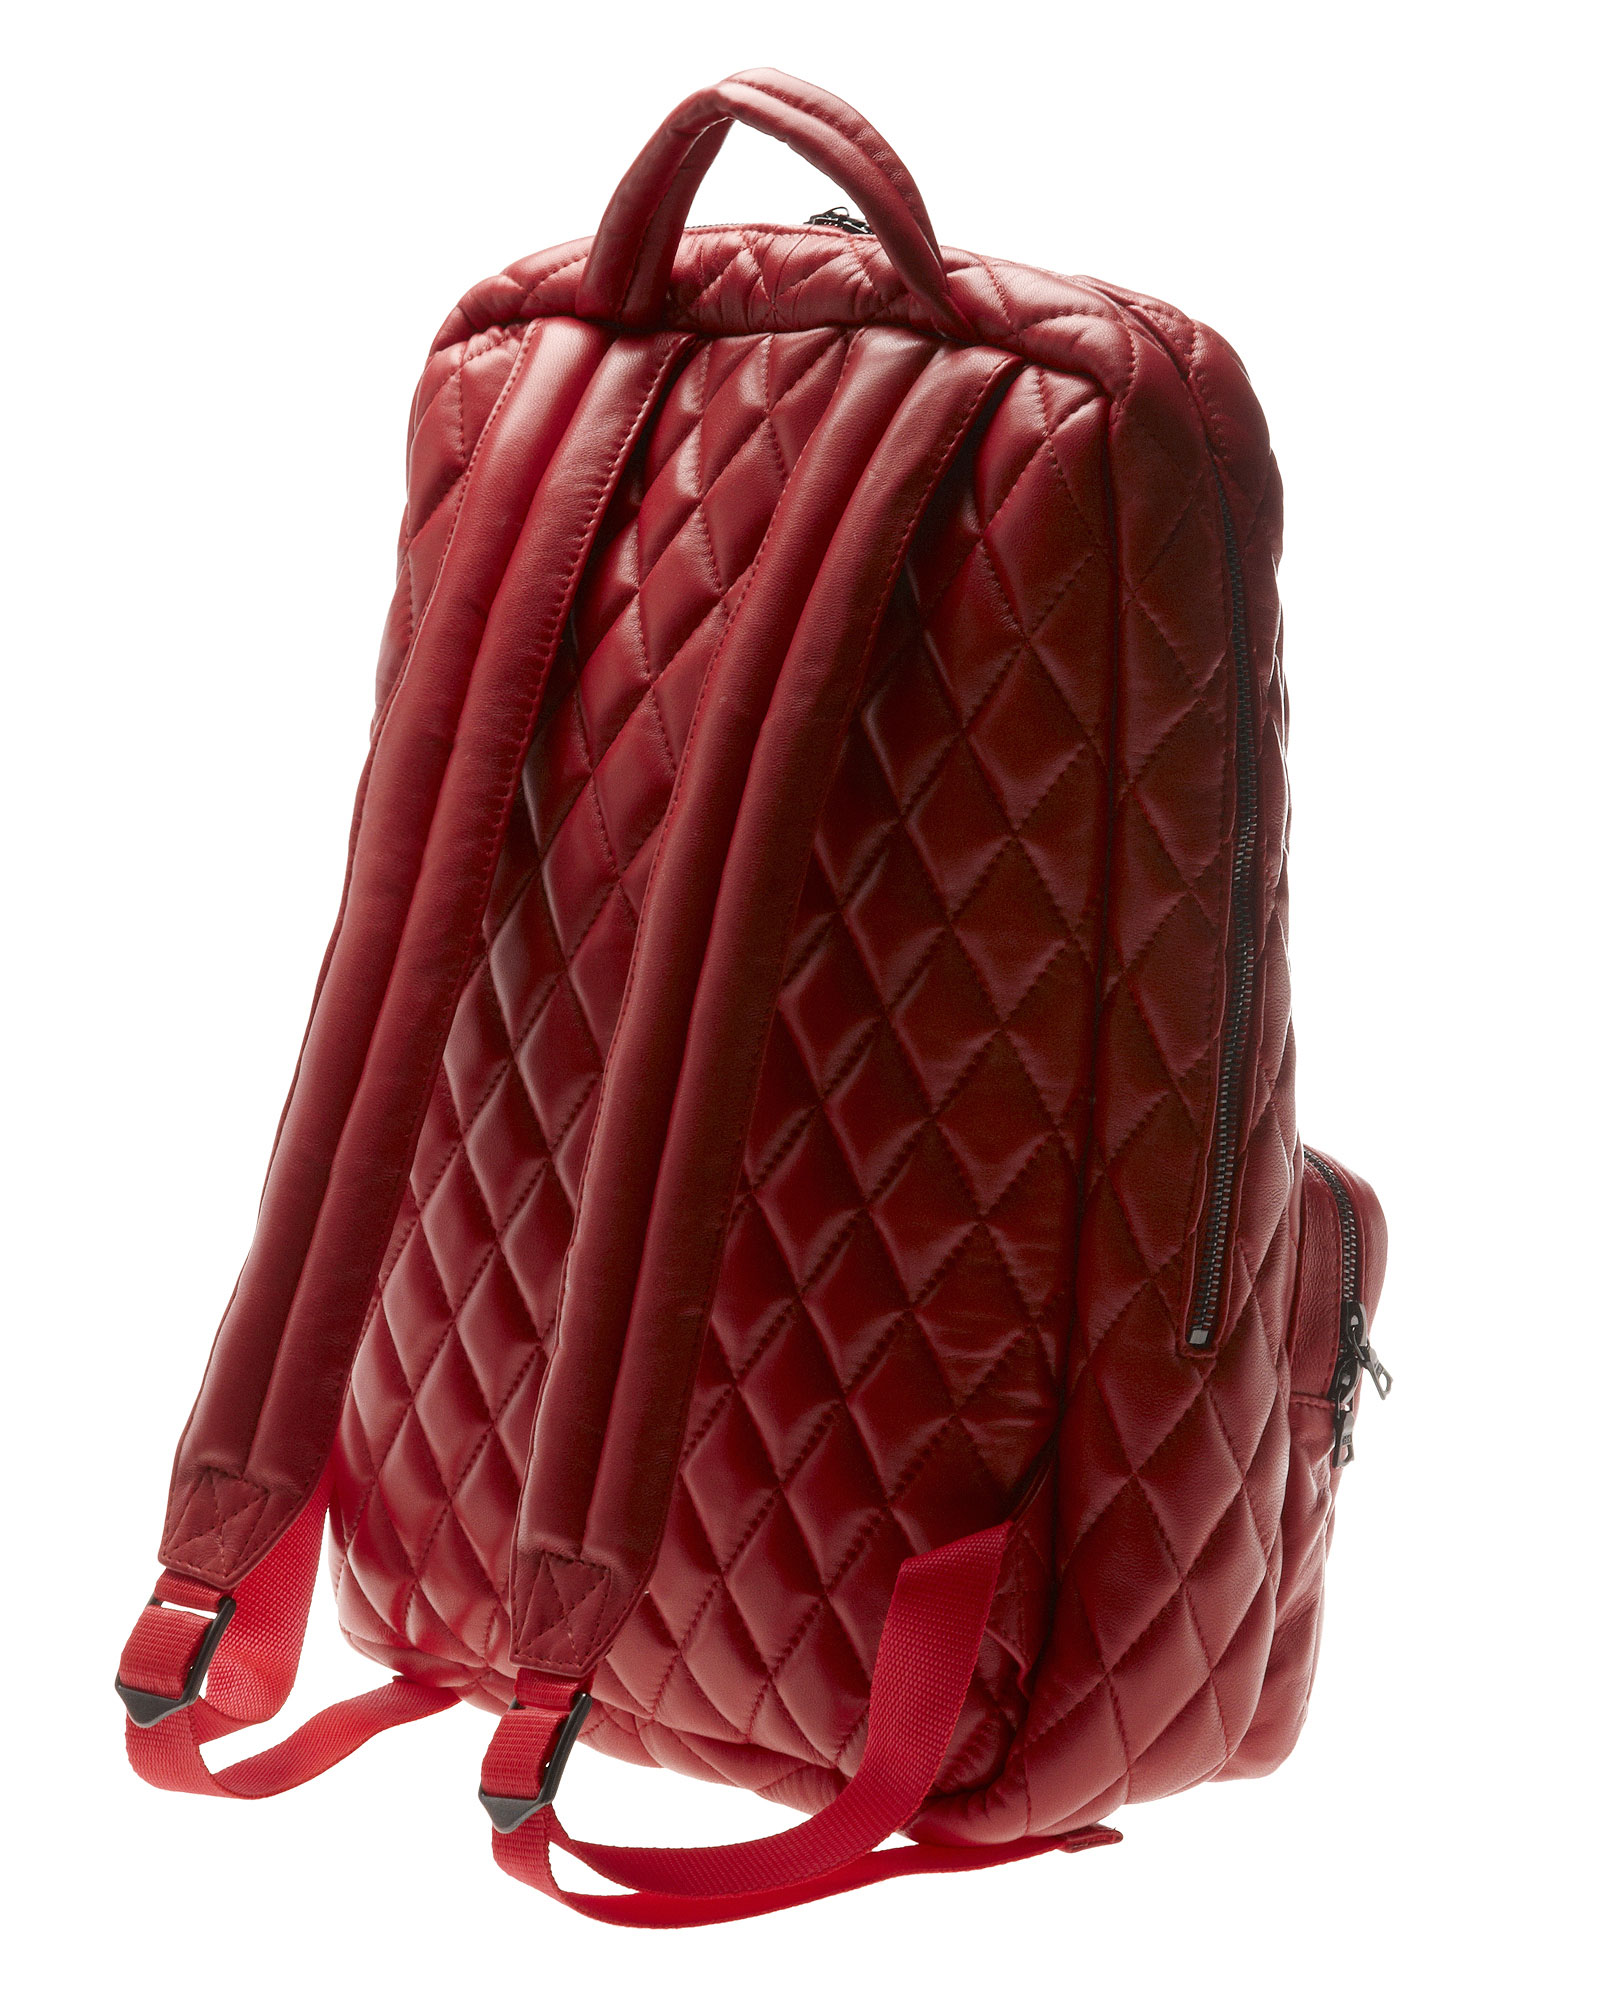 Lyst - H By Harris Q3 Quilted Leather Backpack in Red for Men